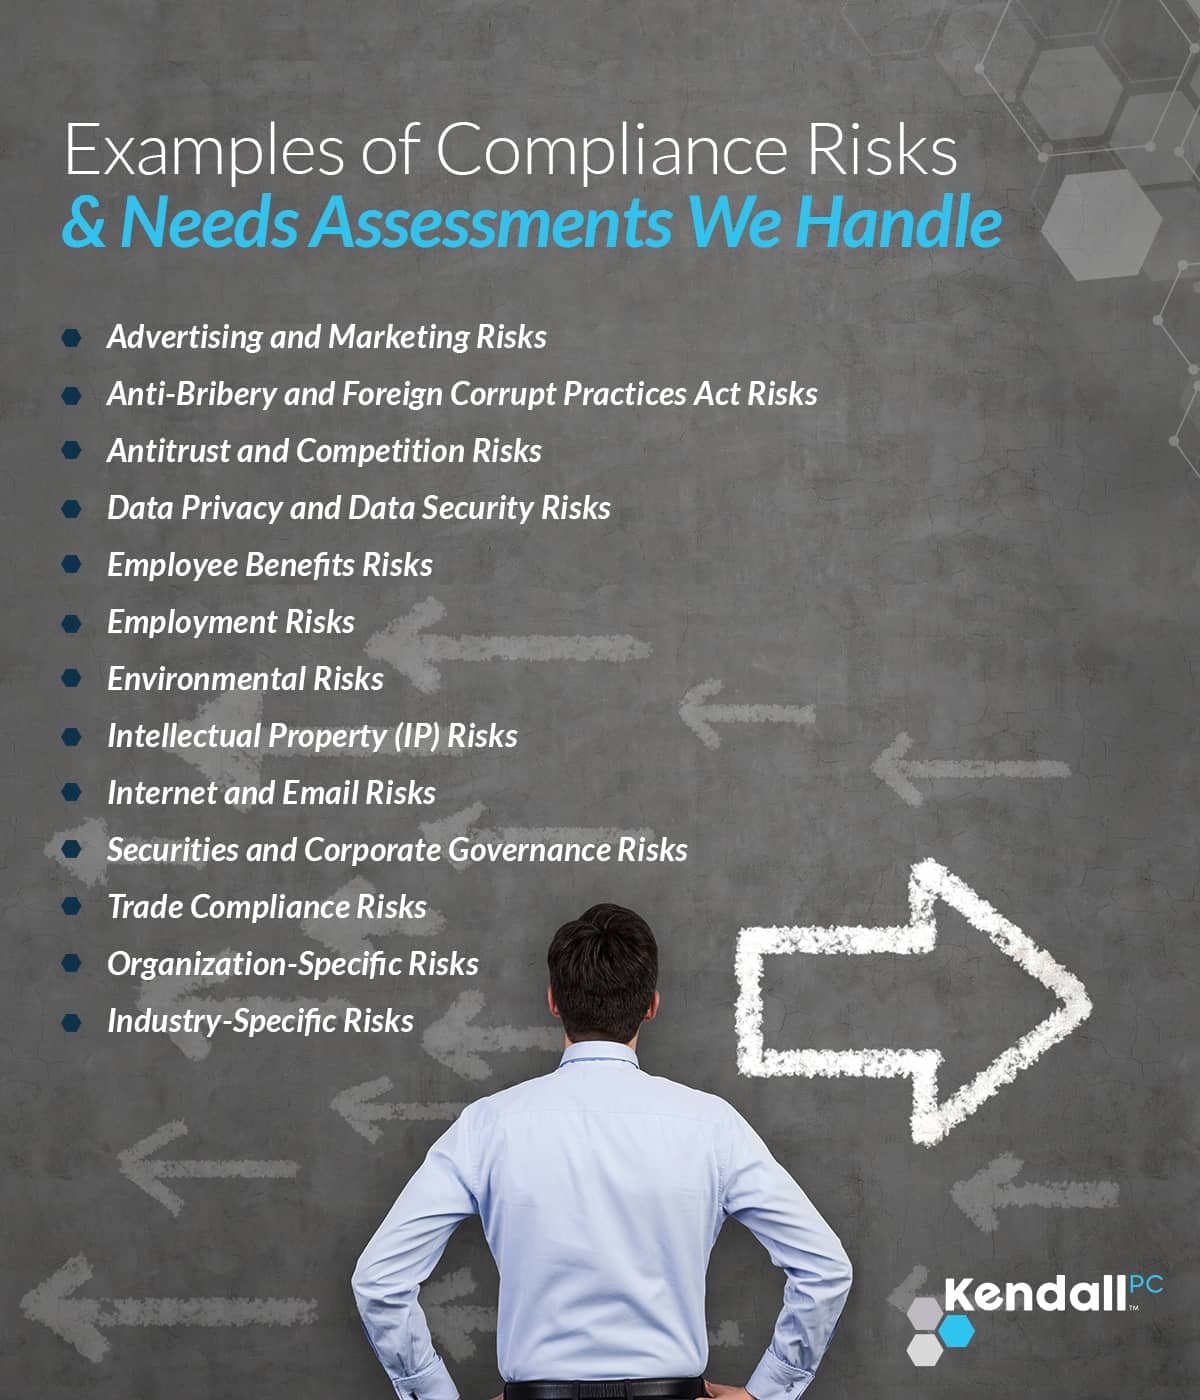 corporate compliance images